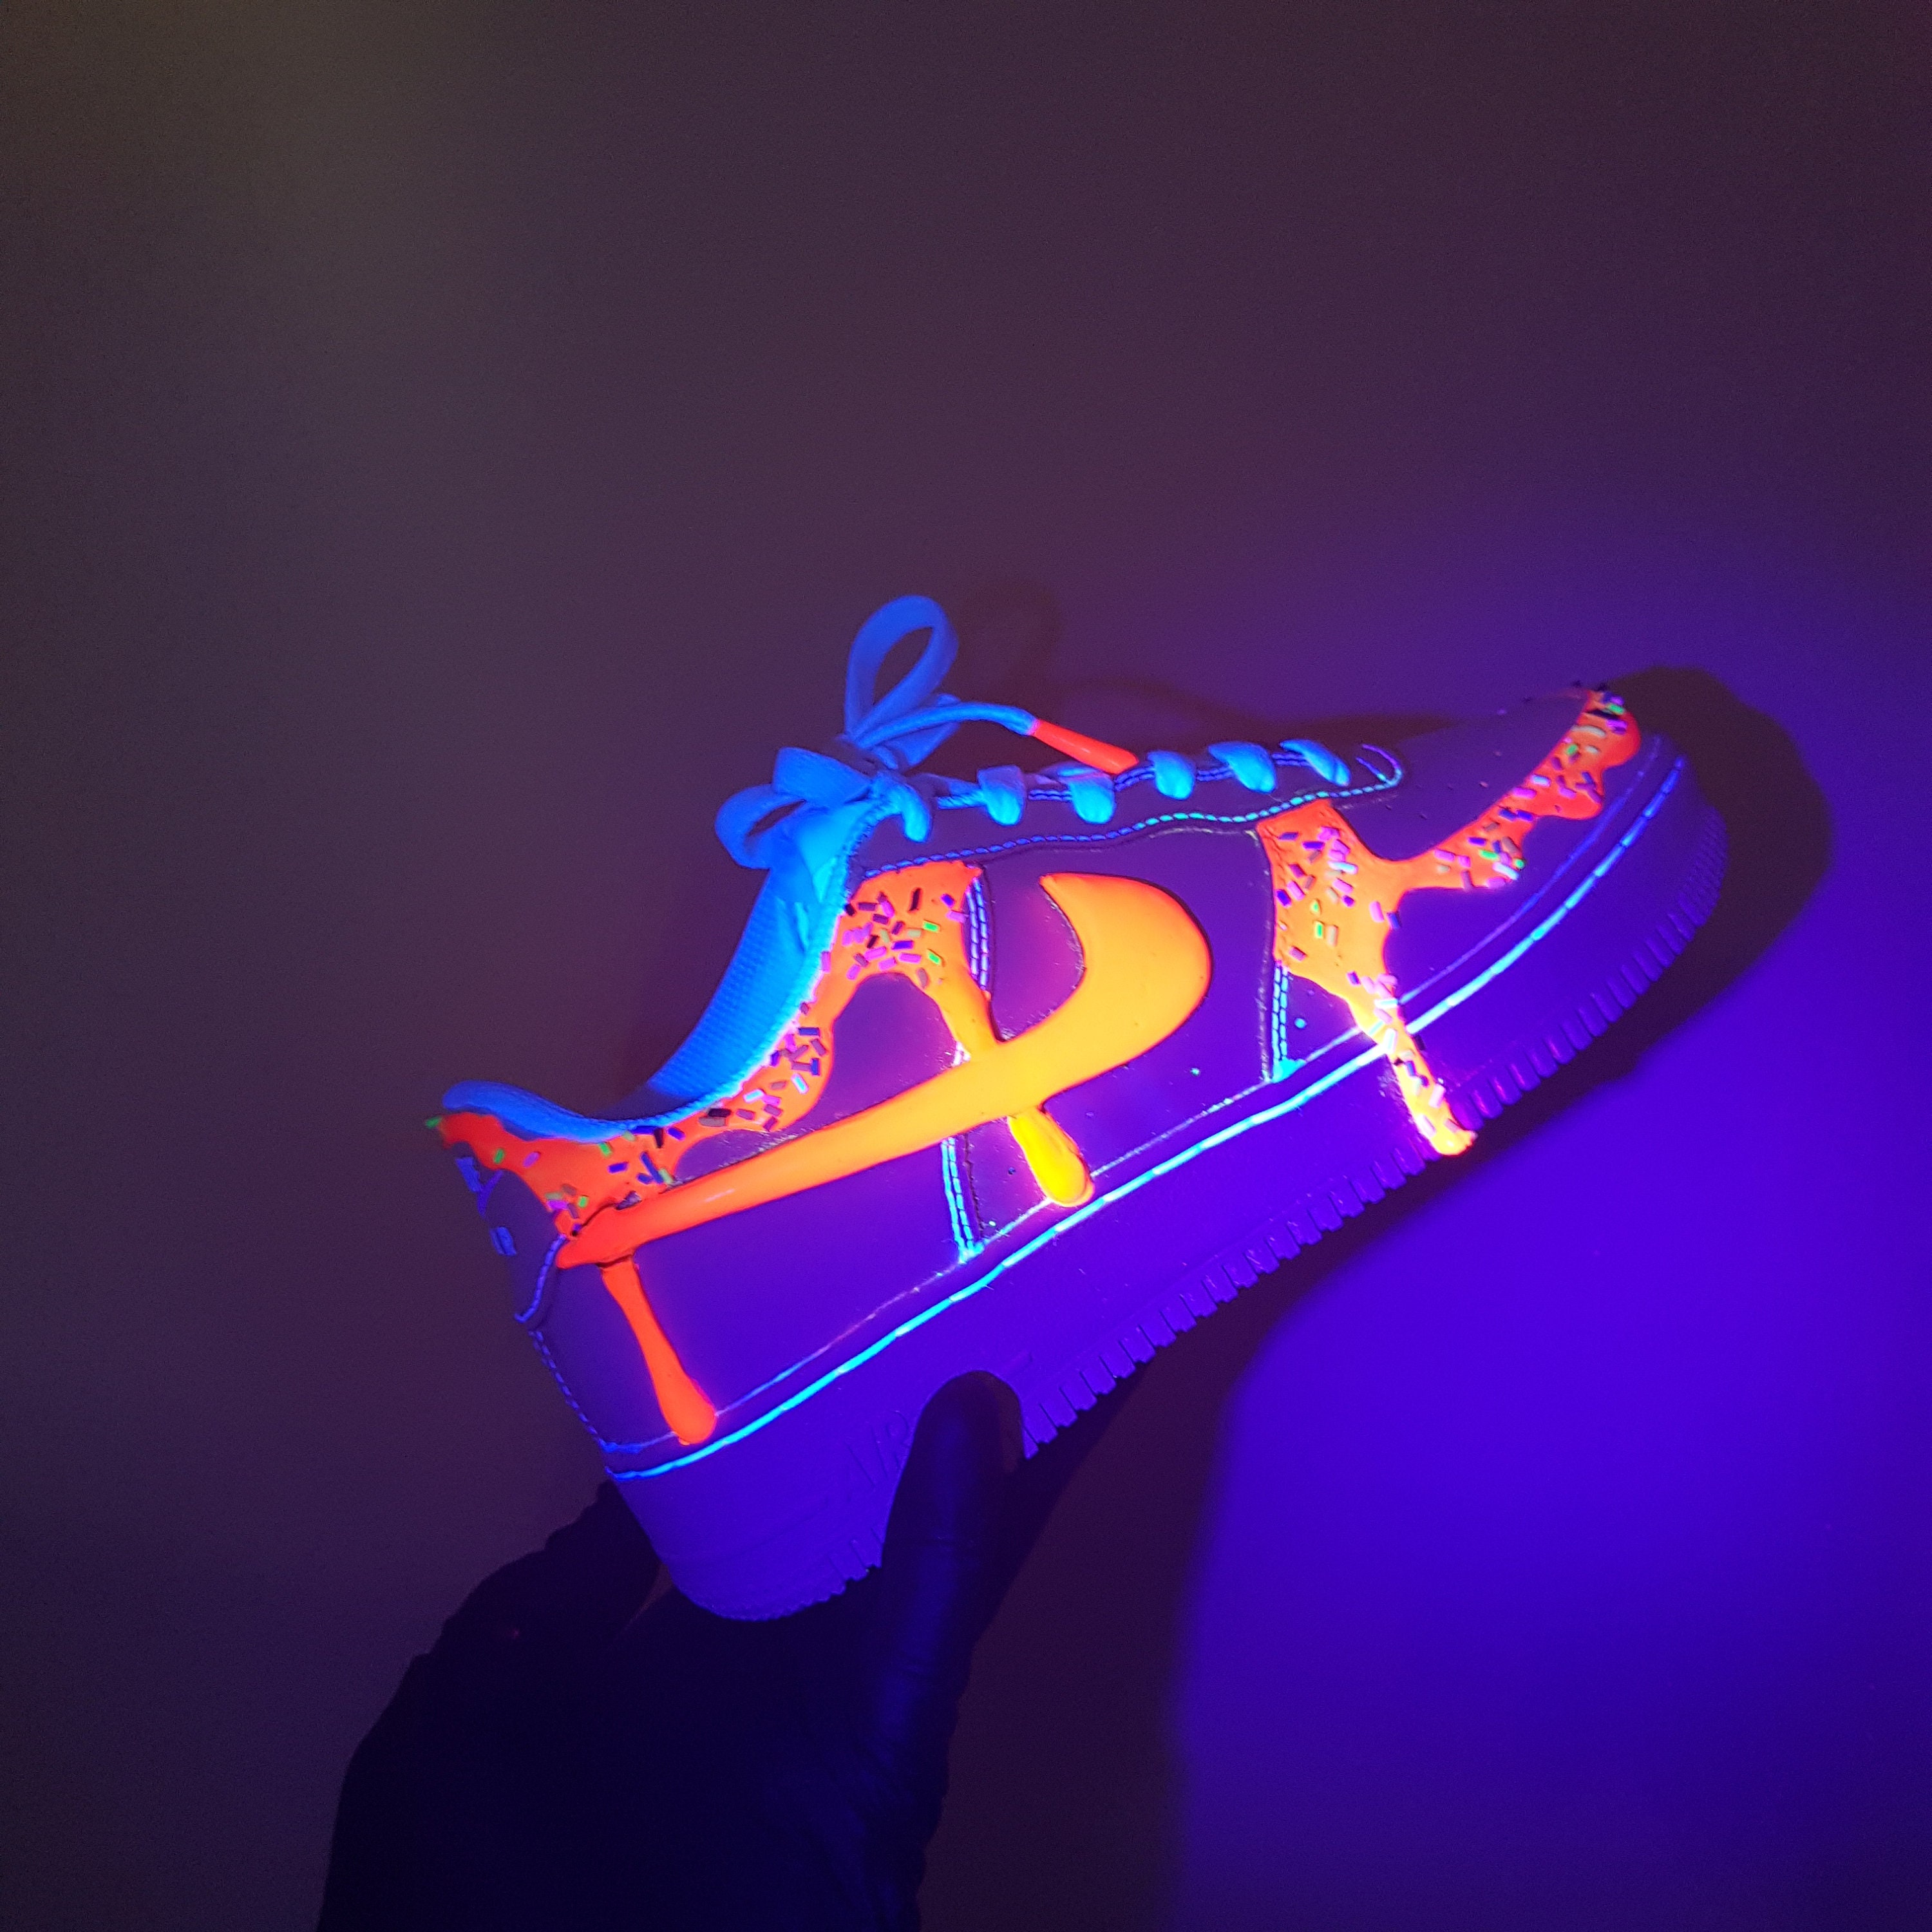 Glow Worms Glow in the Dark Nike AF1 shoes – chadcantcolor